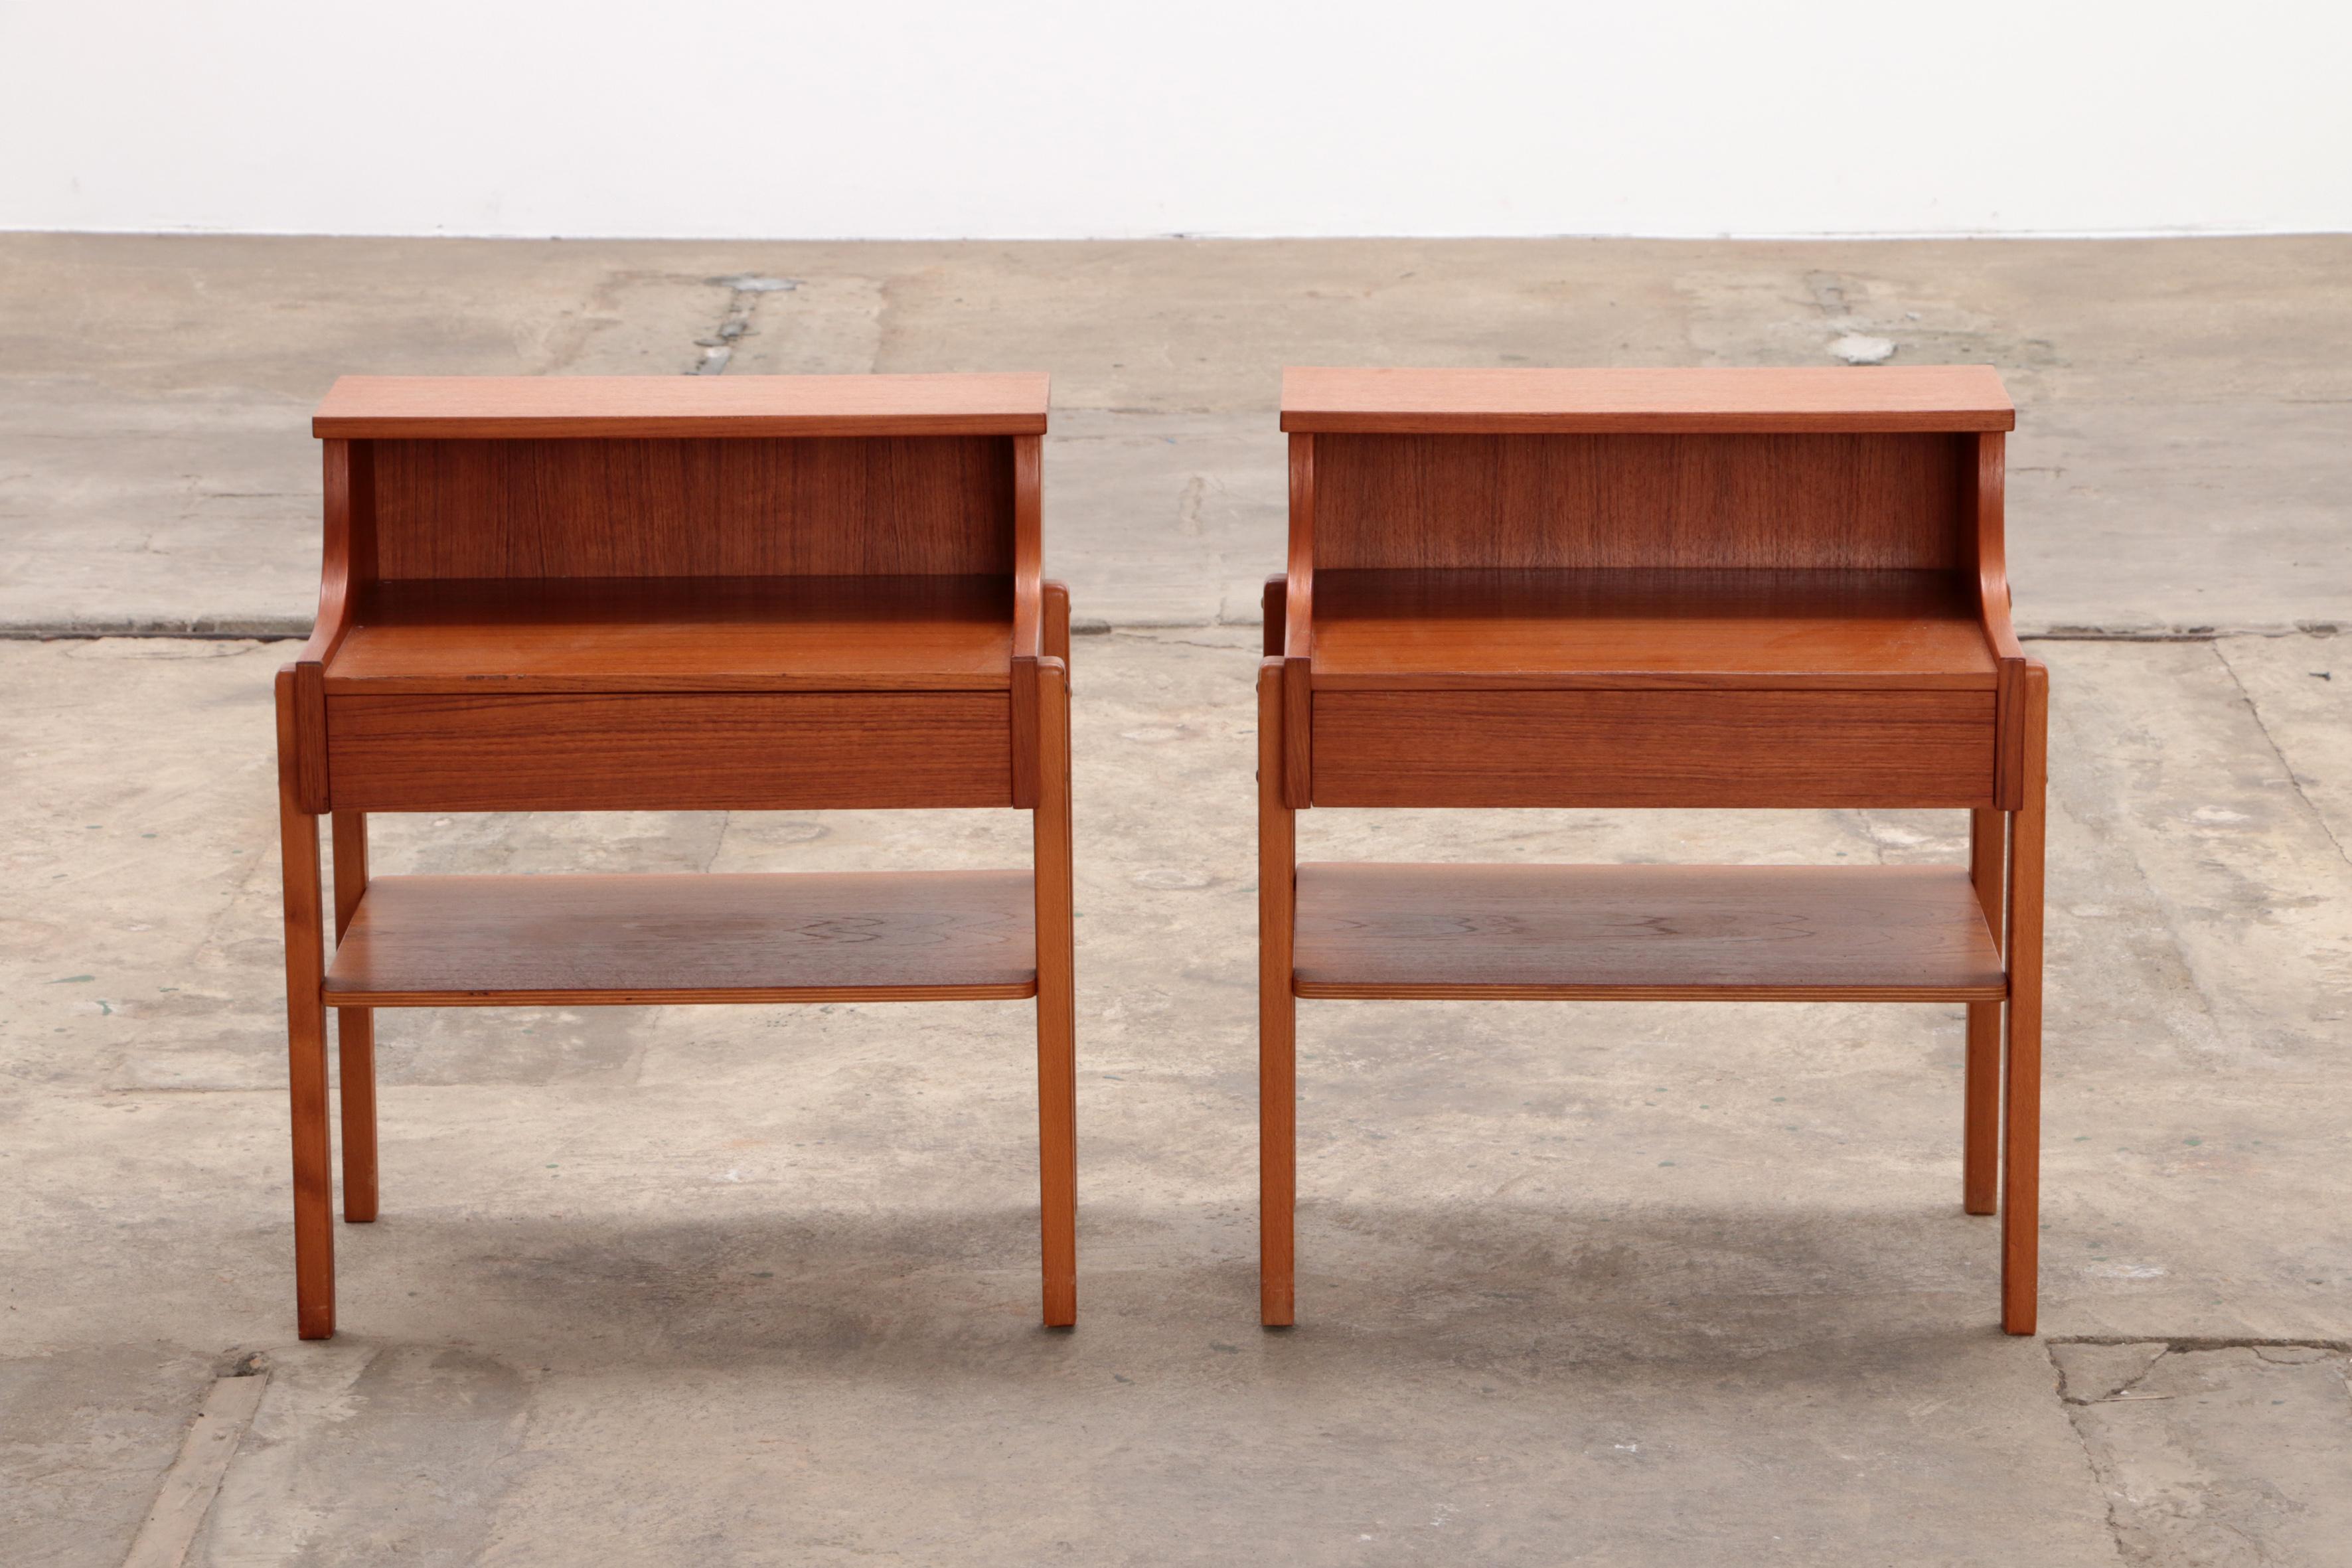 Pair of Scandinavian Bedside Tables in Teak by AB Carlstrom & Co, 1960 For Sale 1